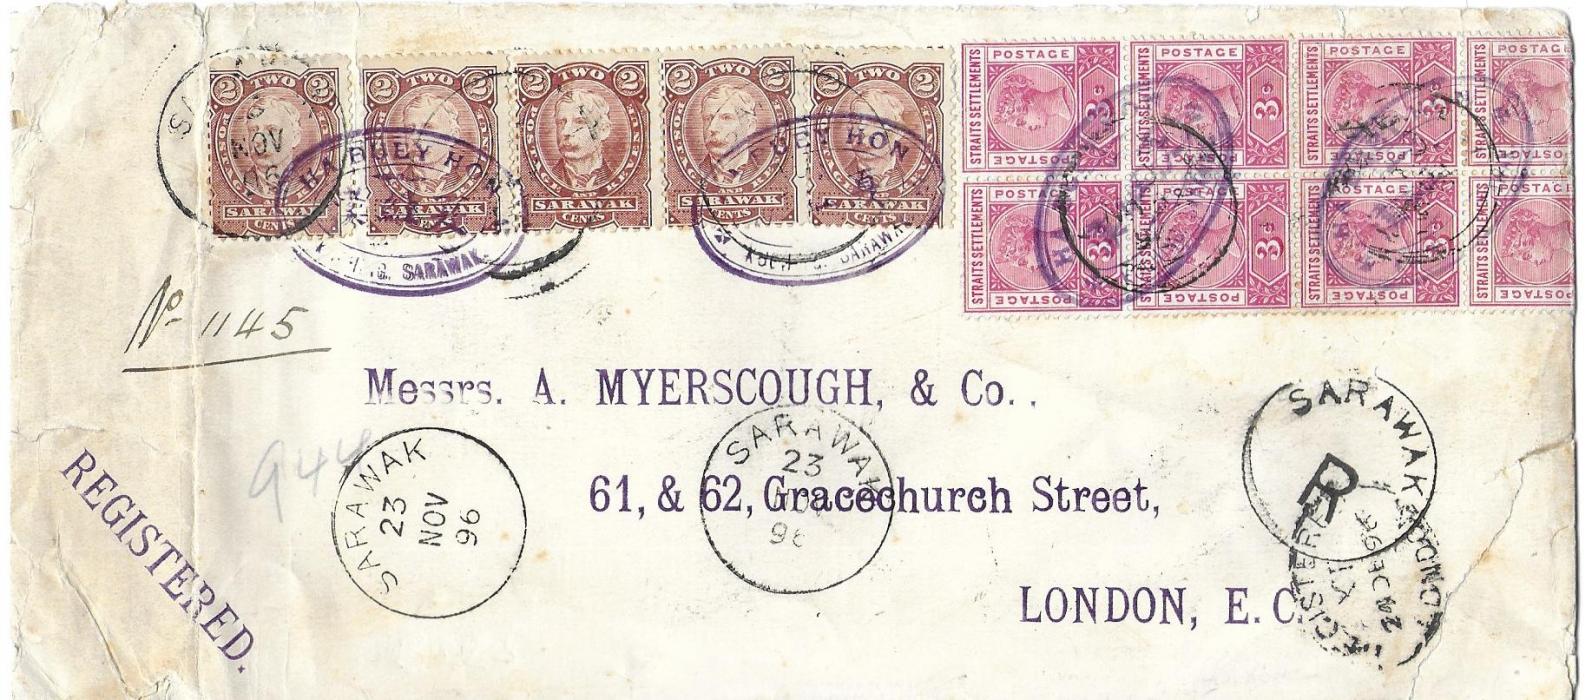 Sarawak 1896 (23 Nov) registered ‘Myerscough’ combination cover to London franked 1895 Sir Charles Brooke 2c. pair and three singles tied Sarawak cds of 1 DE and Straits Settlements 3c. blocks of  8 and 7, the block of eight folded over to reverse with Singapore NO 25 cds, further Sarawak cds on front together with SARAWAK R circular handstamp. All the stamps have also been cancelled by oval company chop HA BUEY HON Kuching Sarawak. Some slight faults, a striking cover.